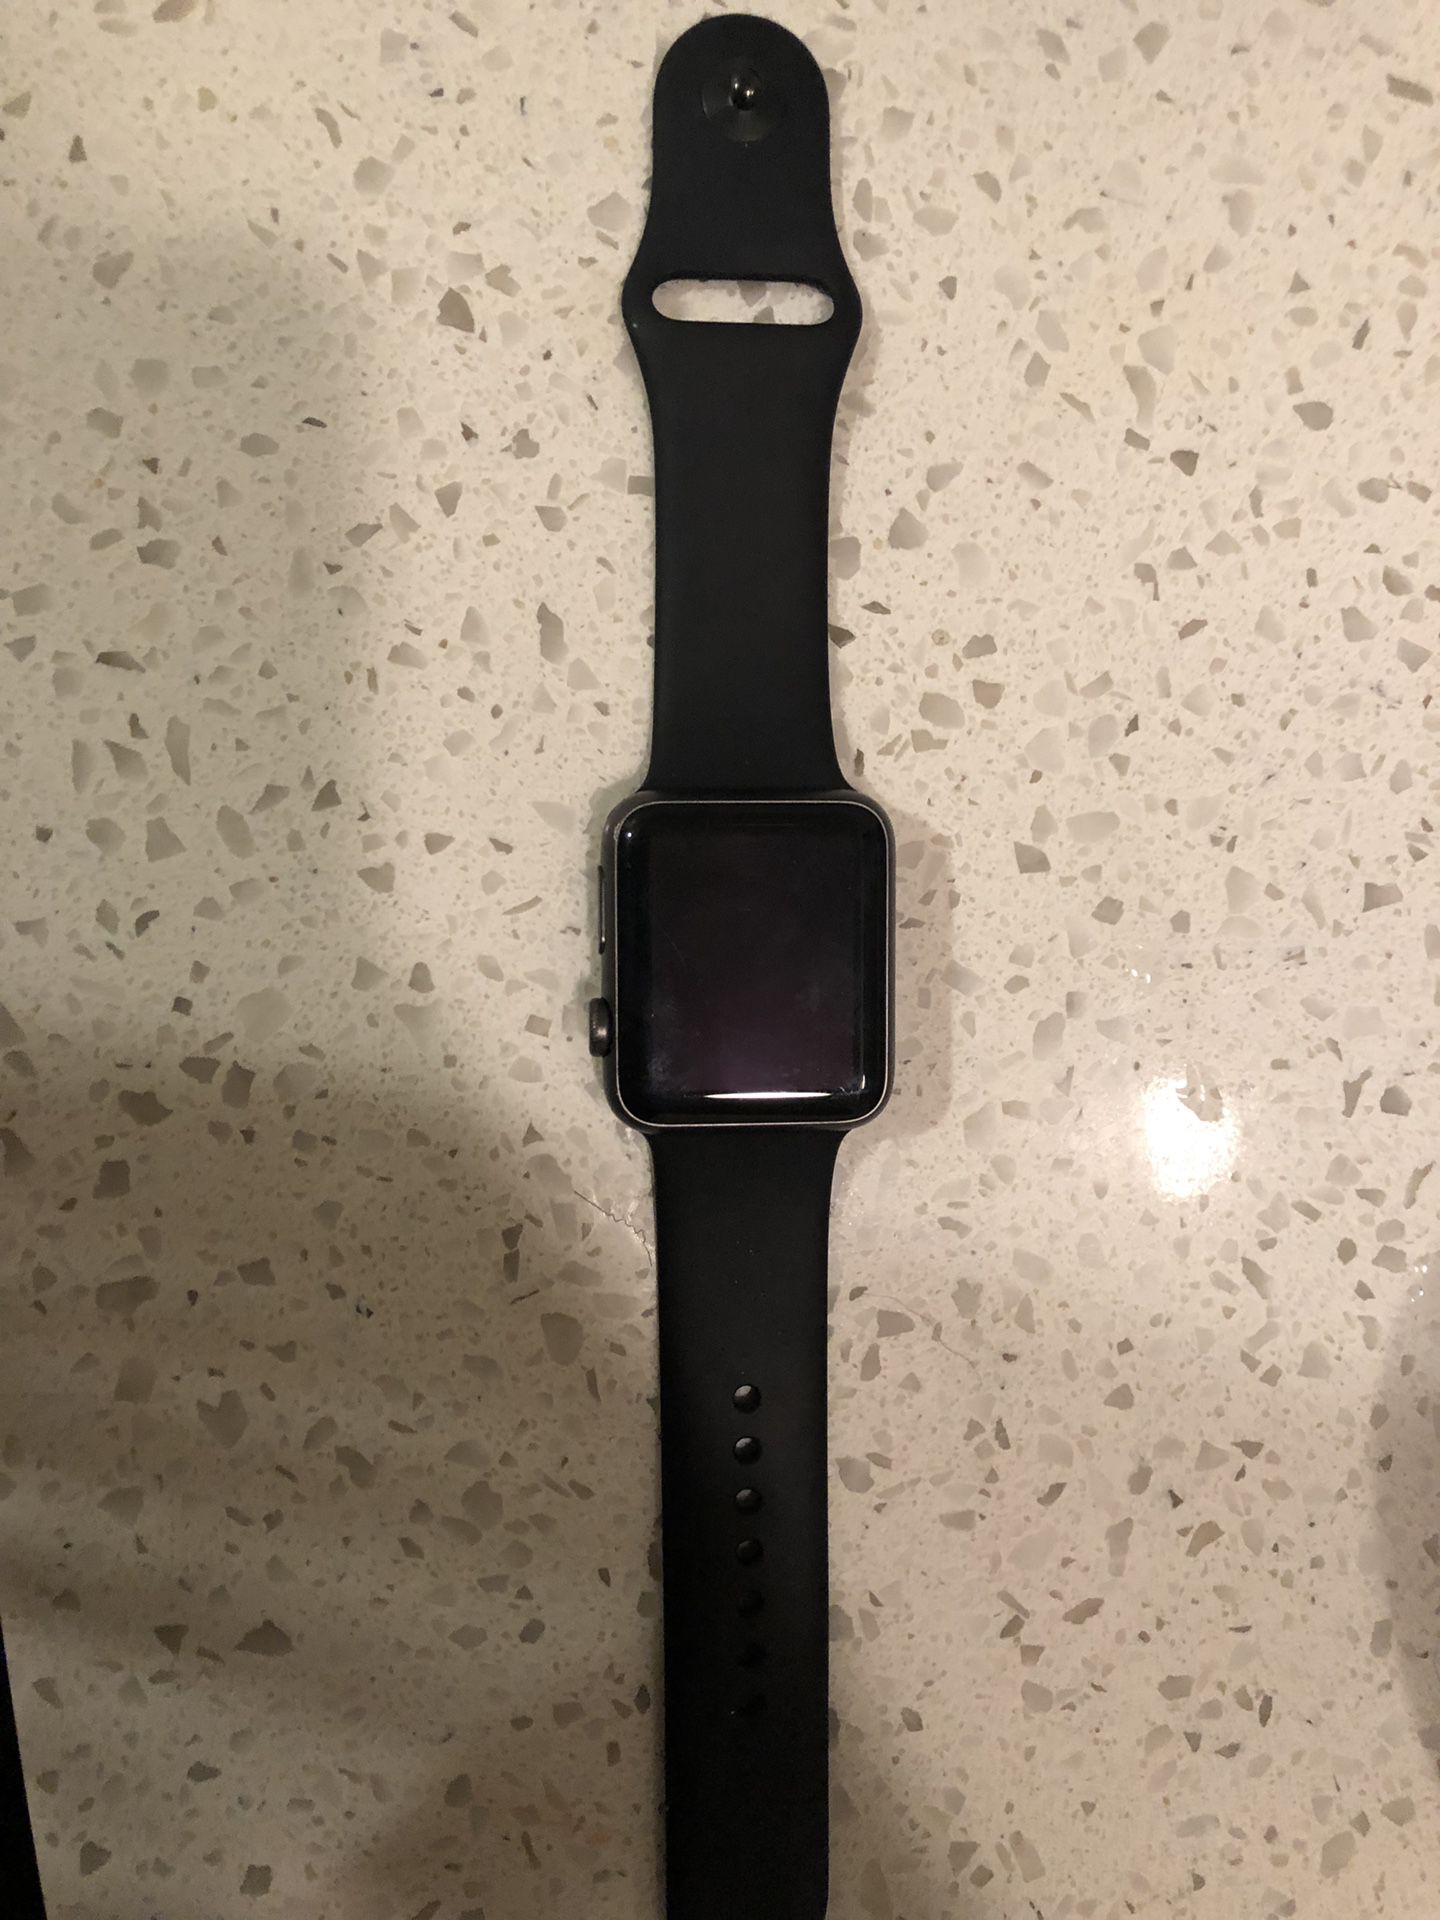 APPLE WATCH 2 42MM, Great conditions, few scratches, Barely Used. Comes With Charger